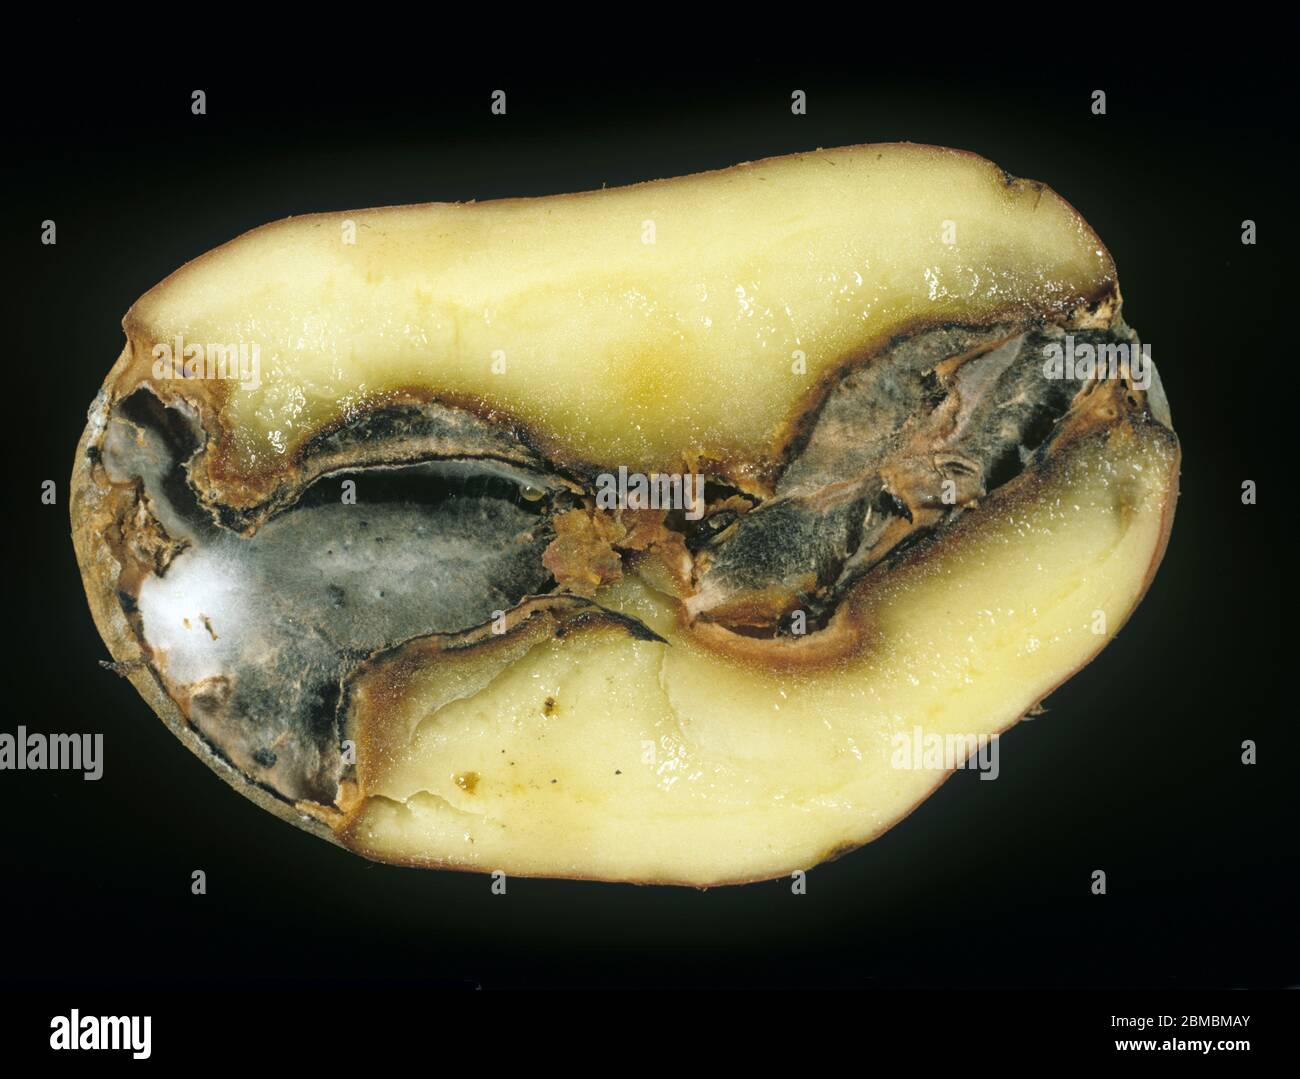 Gangrene (Phoma exigua var. foveata) fungal damage to the flesh of a potato tuber shown in cut section Stock Photo